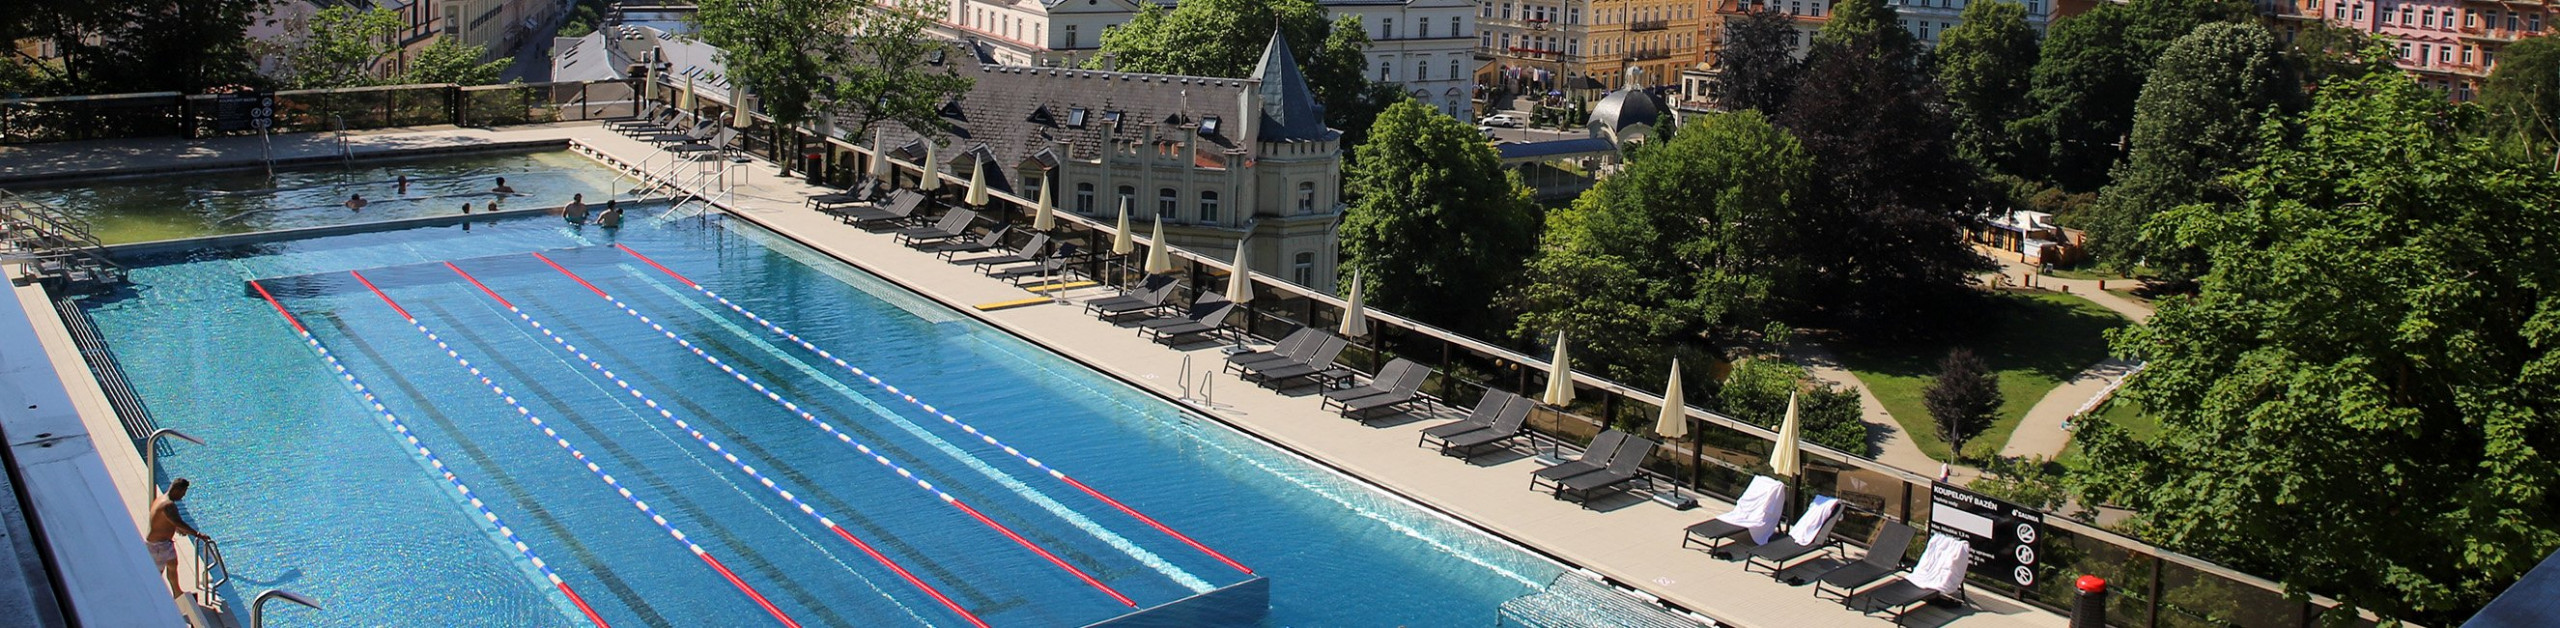 Karlsbad - Spa Hotel Thermal banner picture